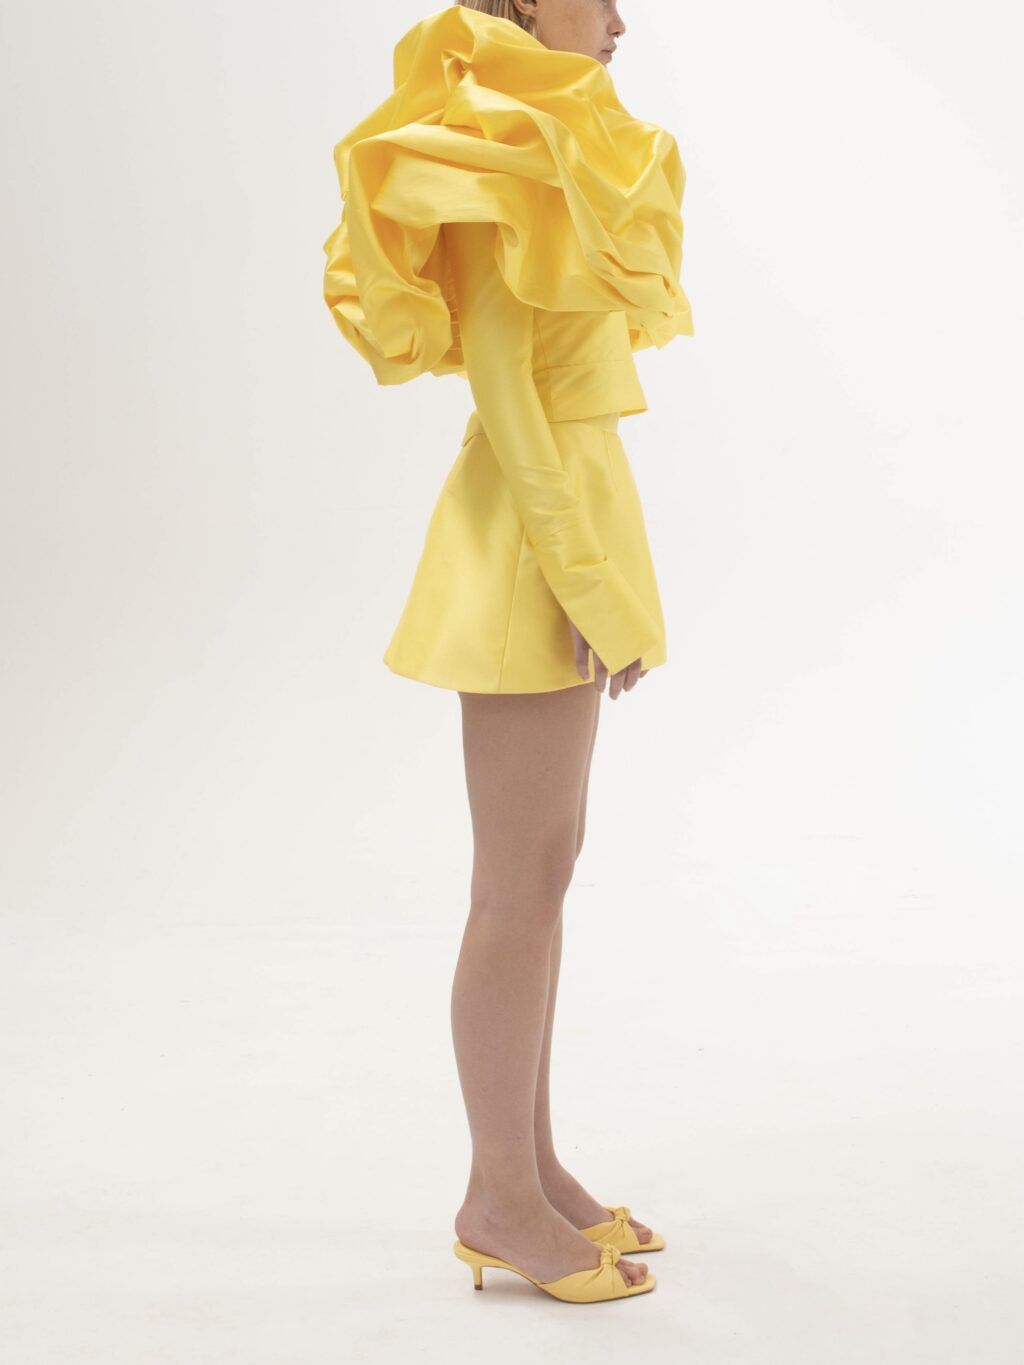 Dress With Dramatic Shoulder Details In Yellow